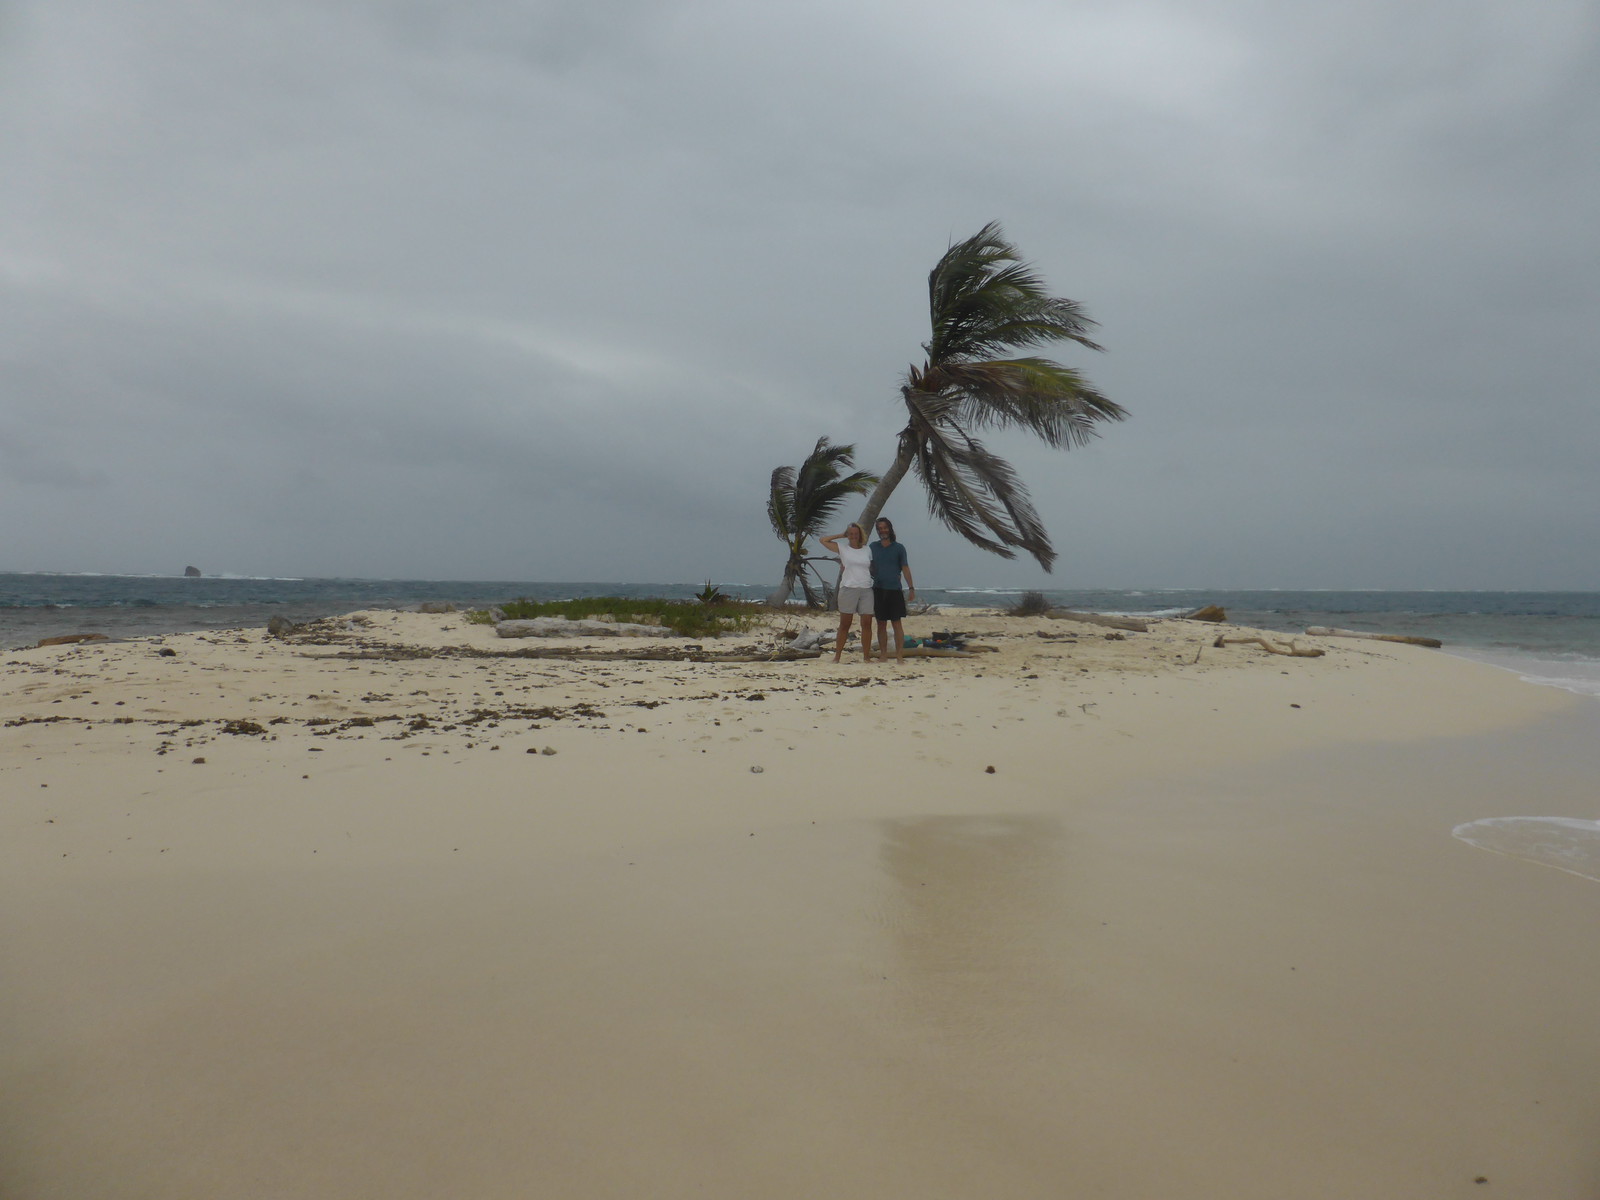 Marooned on two-palm island